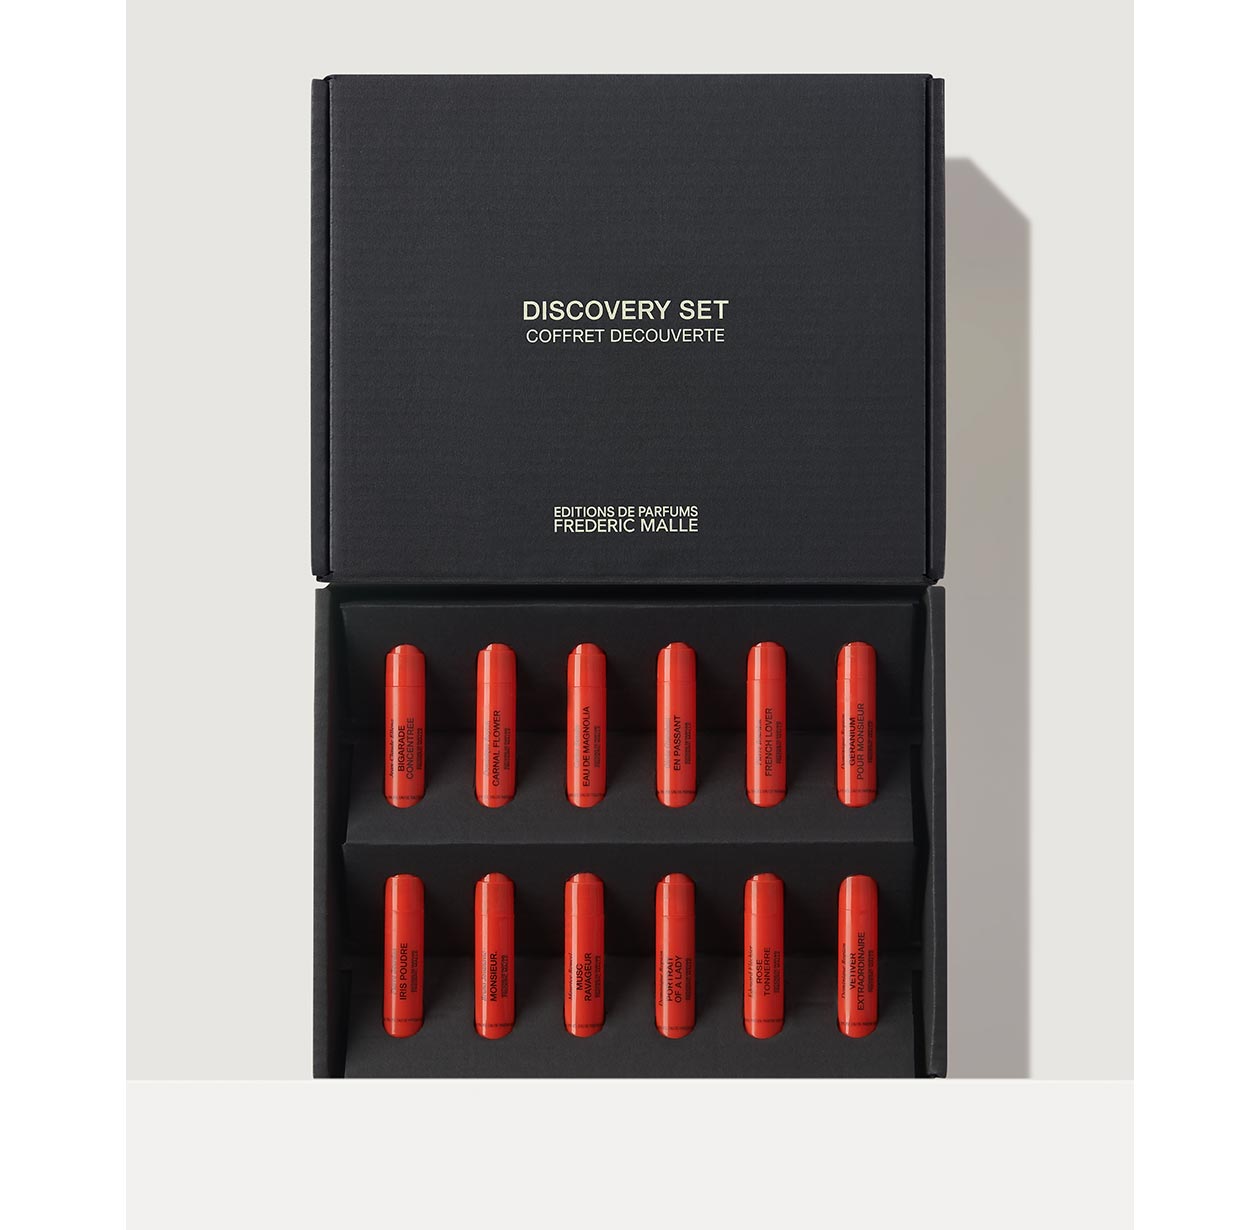 Discover set. Frederic Malle Set. Frederic Malle Travel Set. Миниатюры Frederic Malle 3,5. Дискавери сет духи.